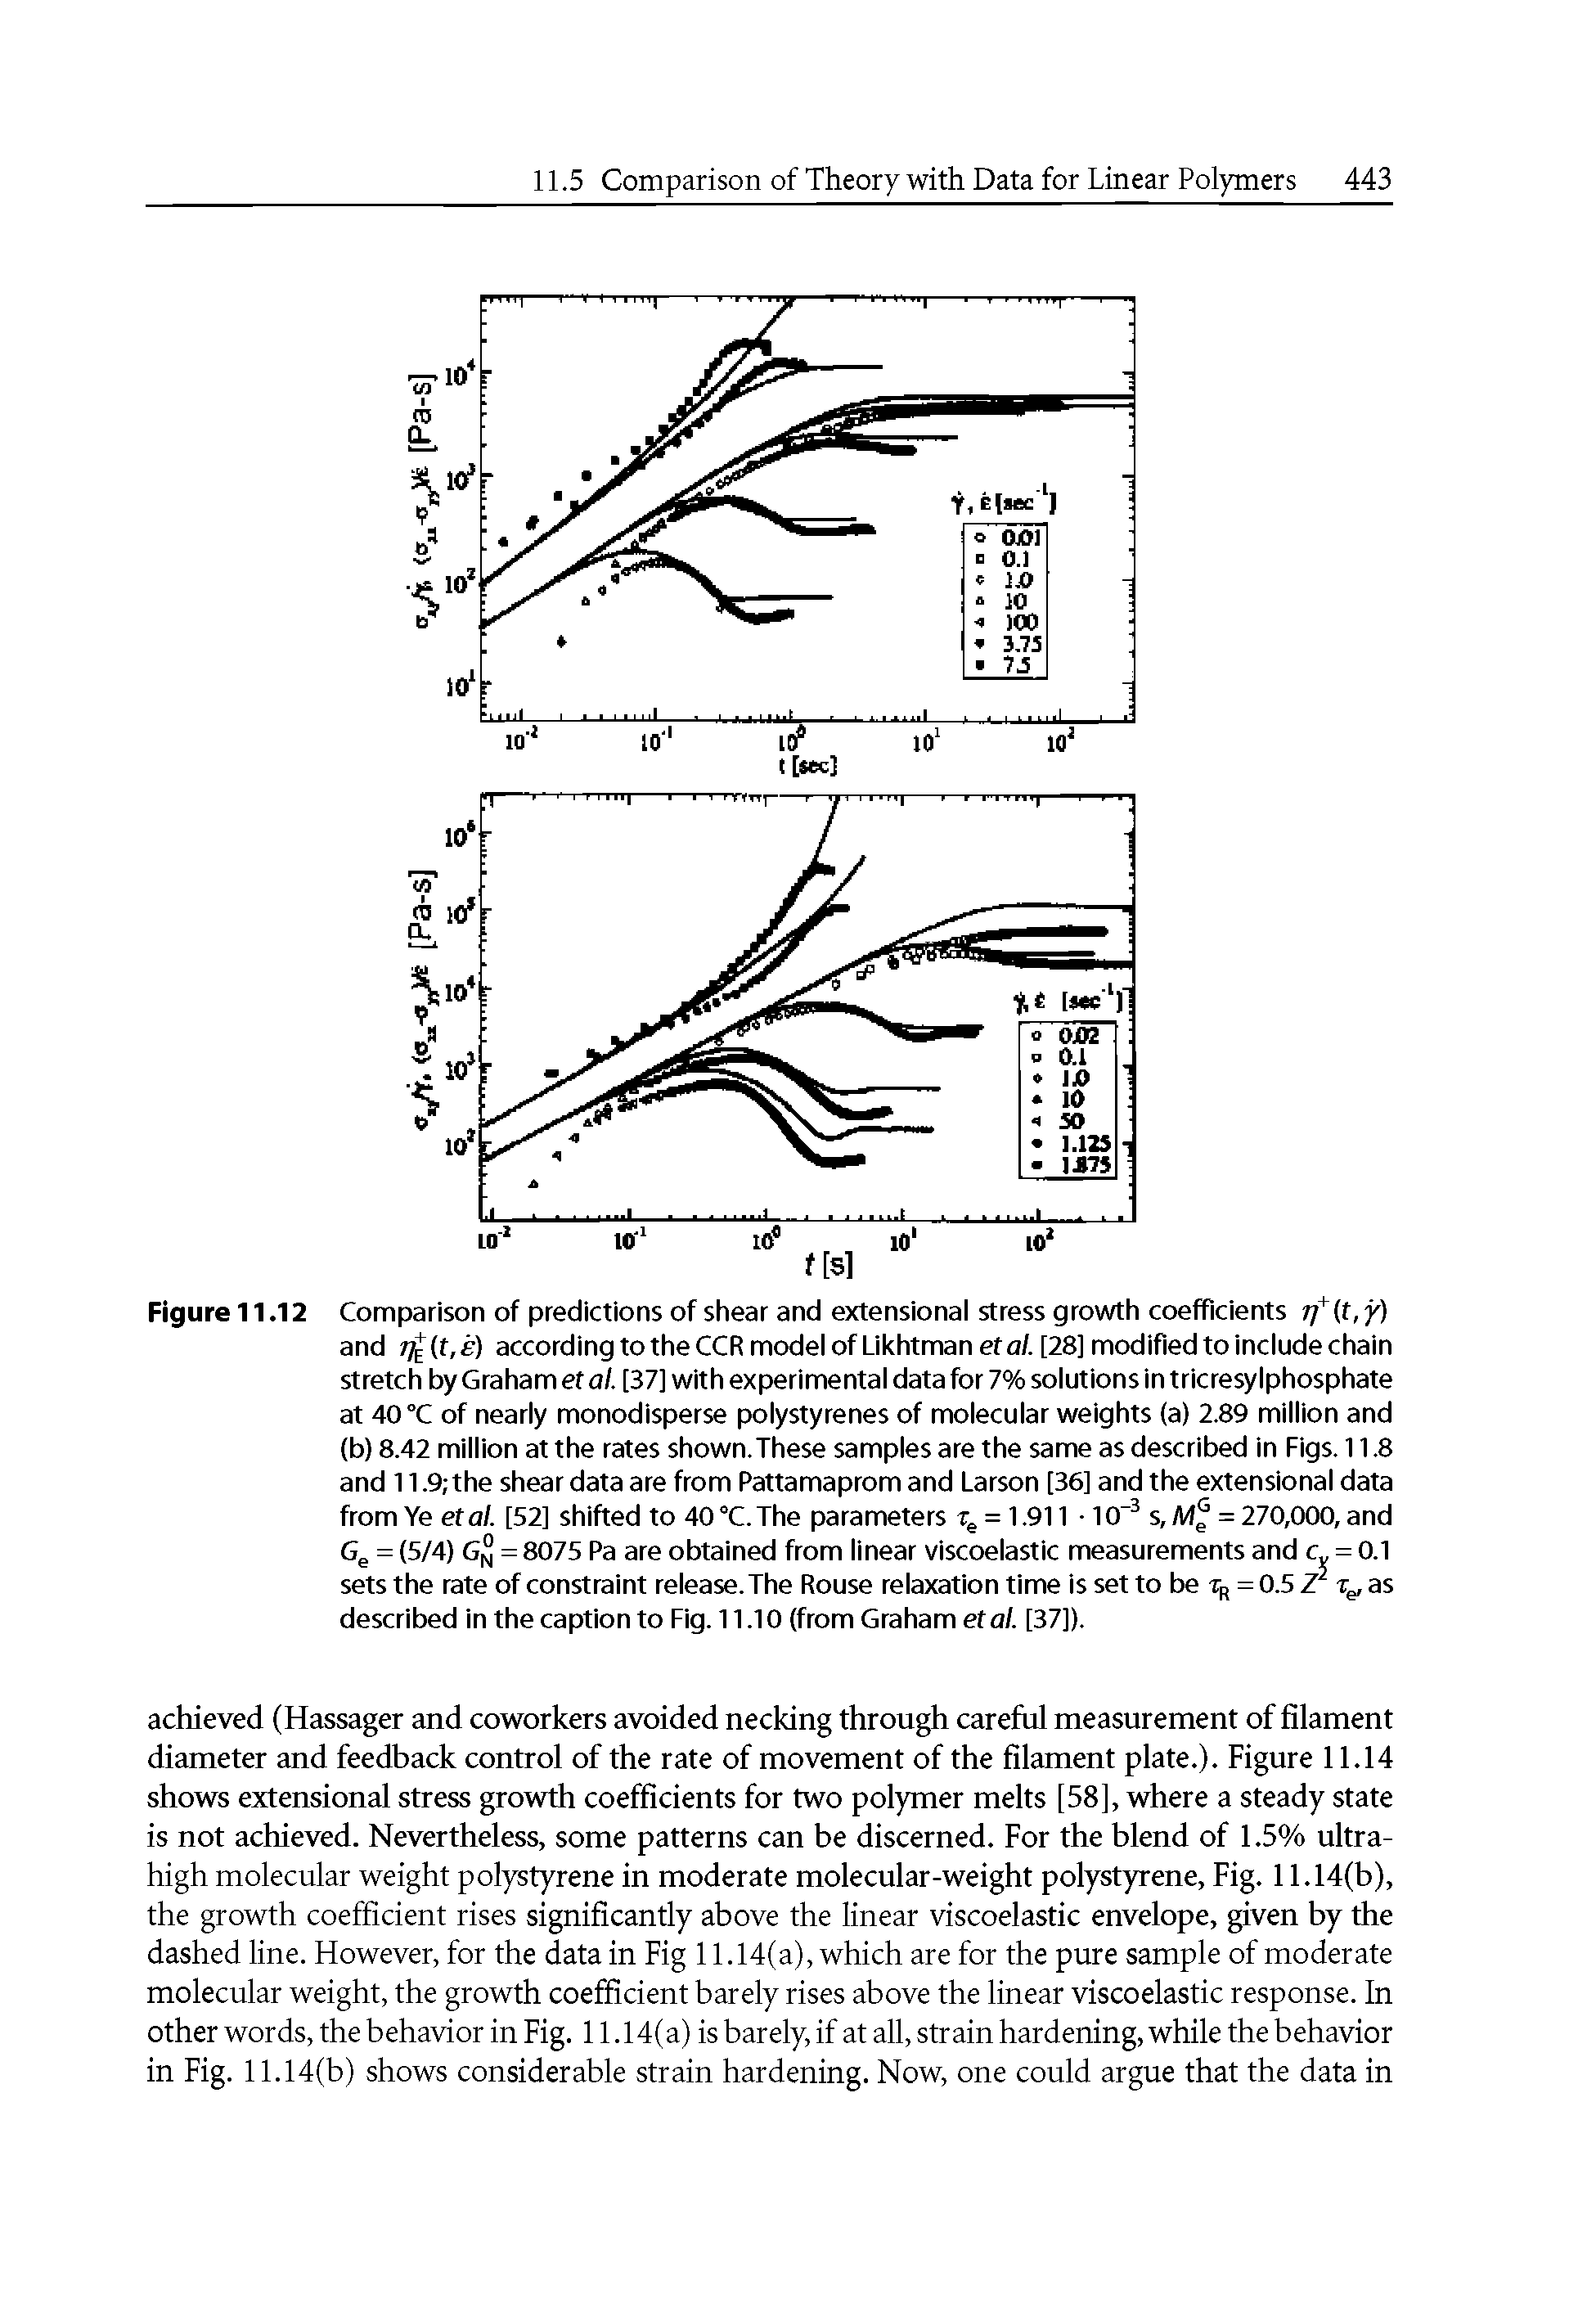 Figure 11.12 Comparison of predictions of shear and extensional stress growth coefficients rf (f, y) and (f, e) according to the CCR model of Likhtman etal. [28] modified to include chain stretch by Graham et al. [37] with experimental data for 7% solutions in tricresylphosphate at 40 °C of nearly monodisperse polystyrenes of molecular weights (a) 2.89 million and (b) 8.42 million at the rates shown.These samples are the same as described in Figs. 11.8 and 11.9 the shear data are from Pattamaprom and Larson [36] and the extensional data from Ye et al. [52] shifted to 40 °C. The parameters Tg = 1.911 -10 s, = 270,000, and Gg = (5/4) G 5 = 8075 Pa are obtained from linear viscoelastic measurements and c = 0.1 sets the rate of constraint release. The Rouse relaxation time is set to be tj, = 0.5 Tg, as...